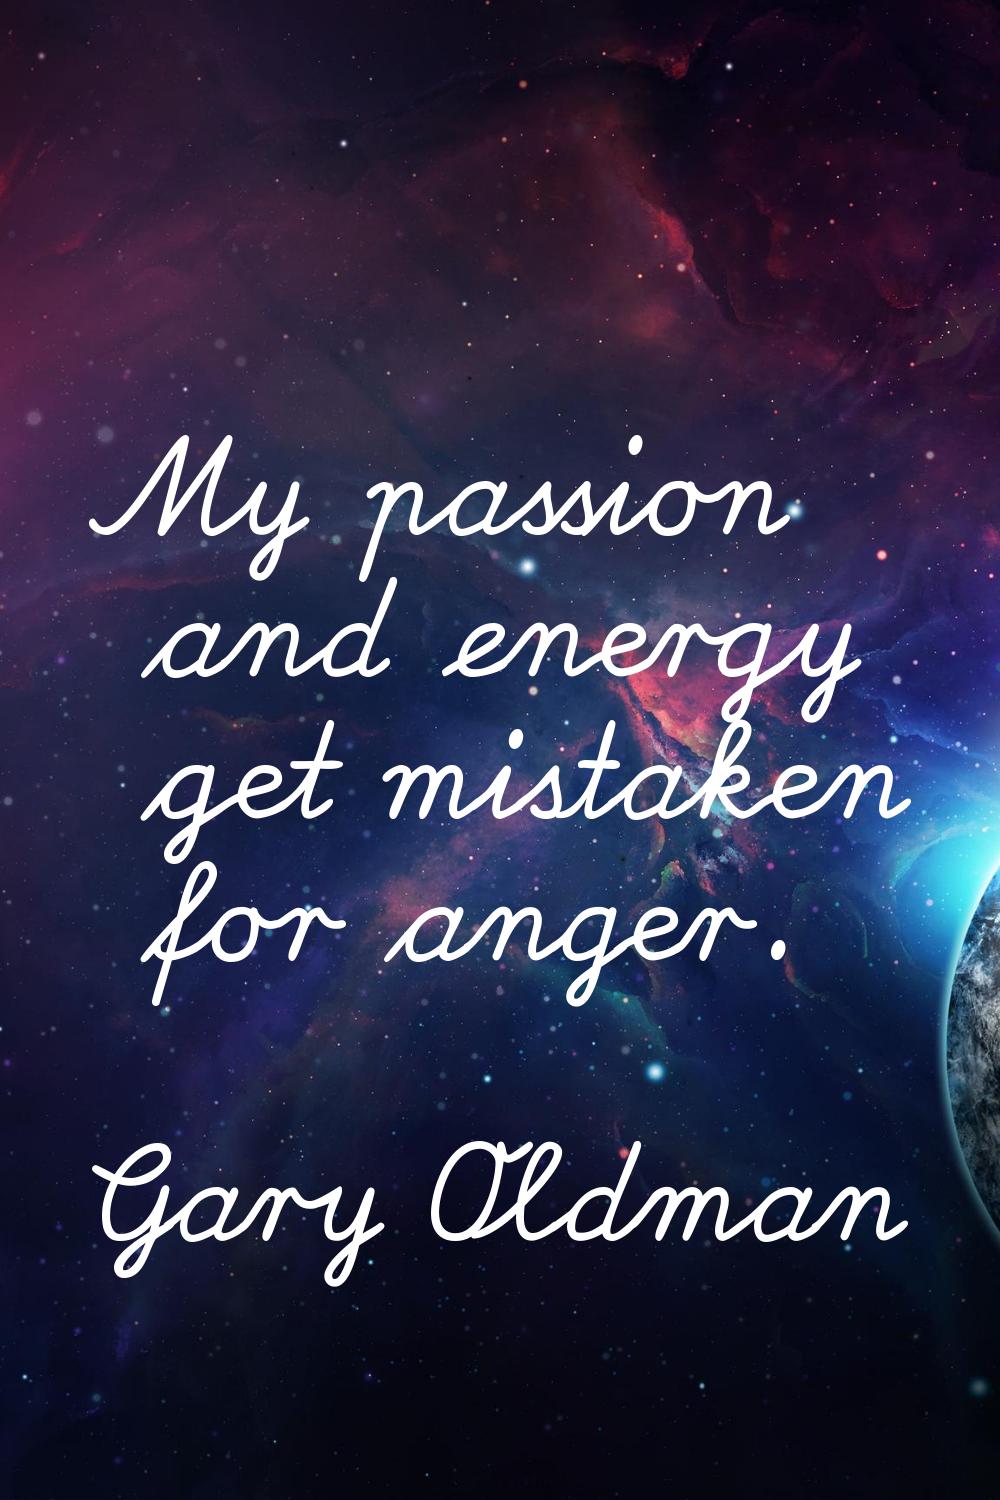 My passion and energy get mistaken for anger.